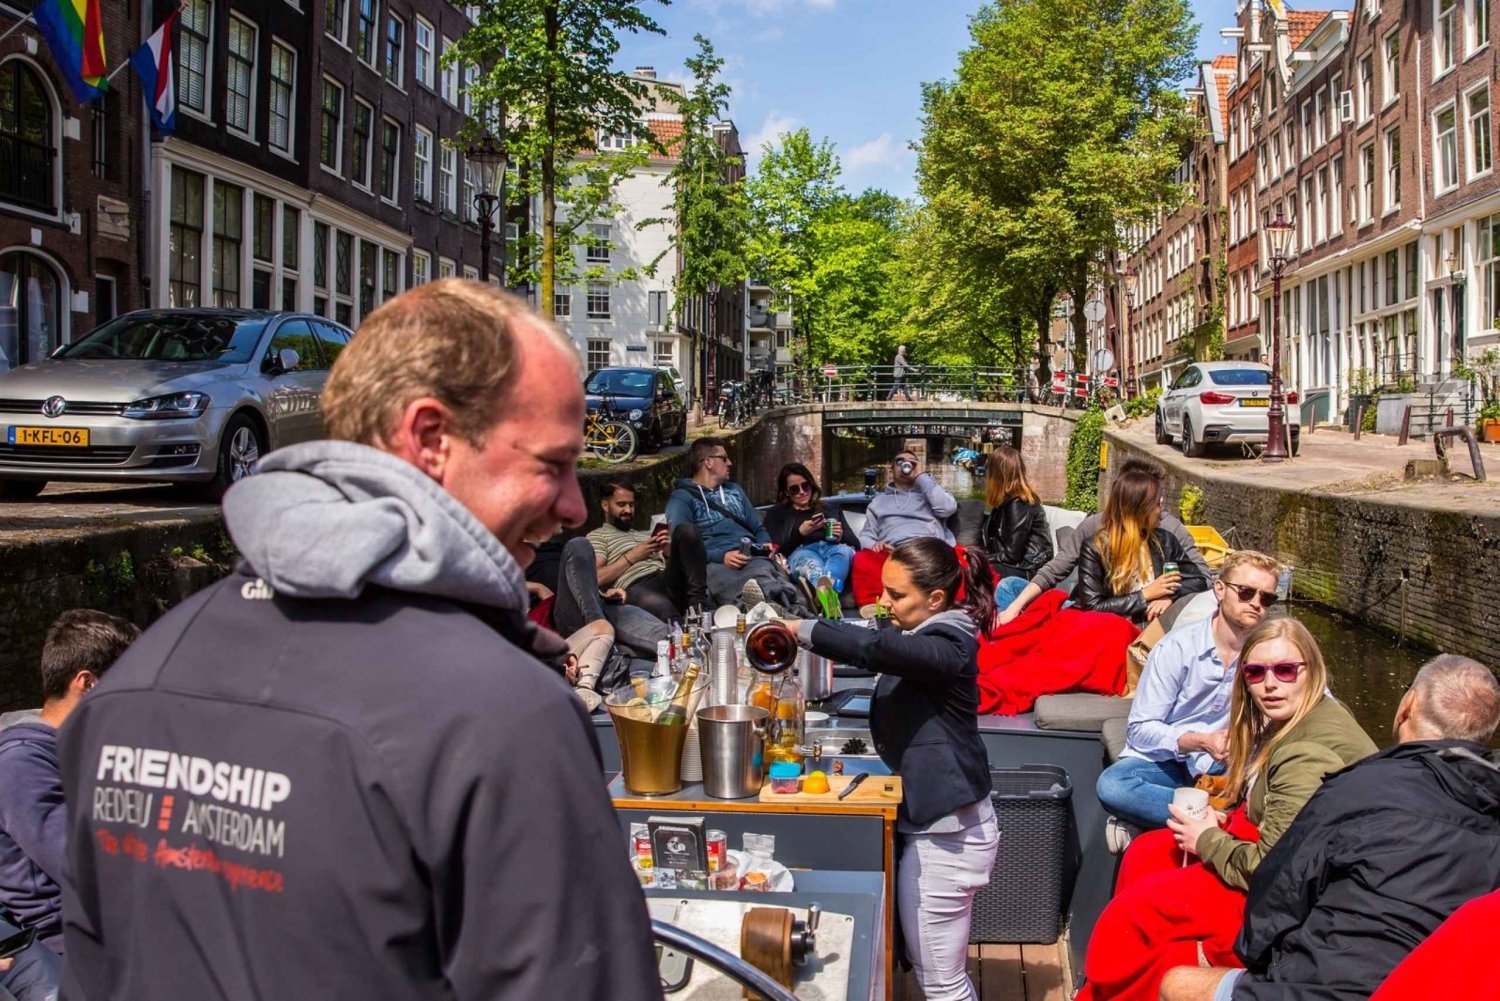 Amsterdam: Luxury Boat Tour with Optional Drinks